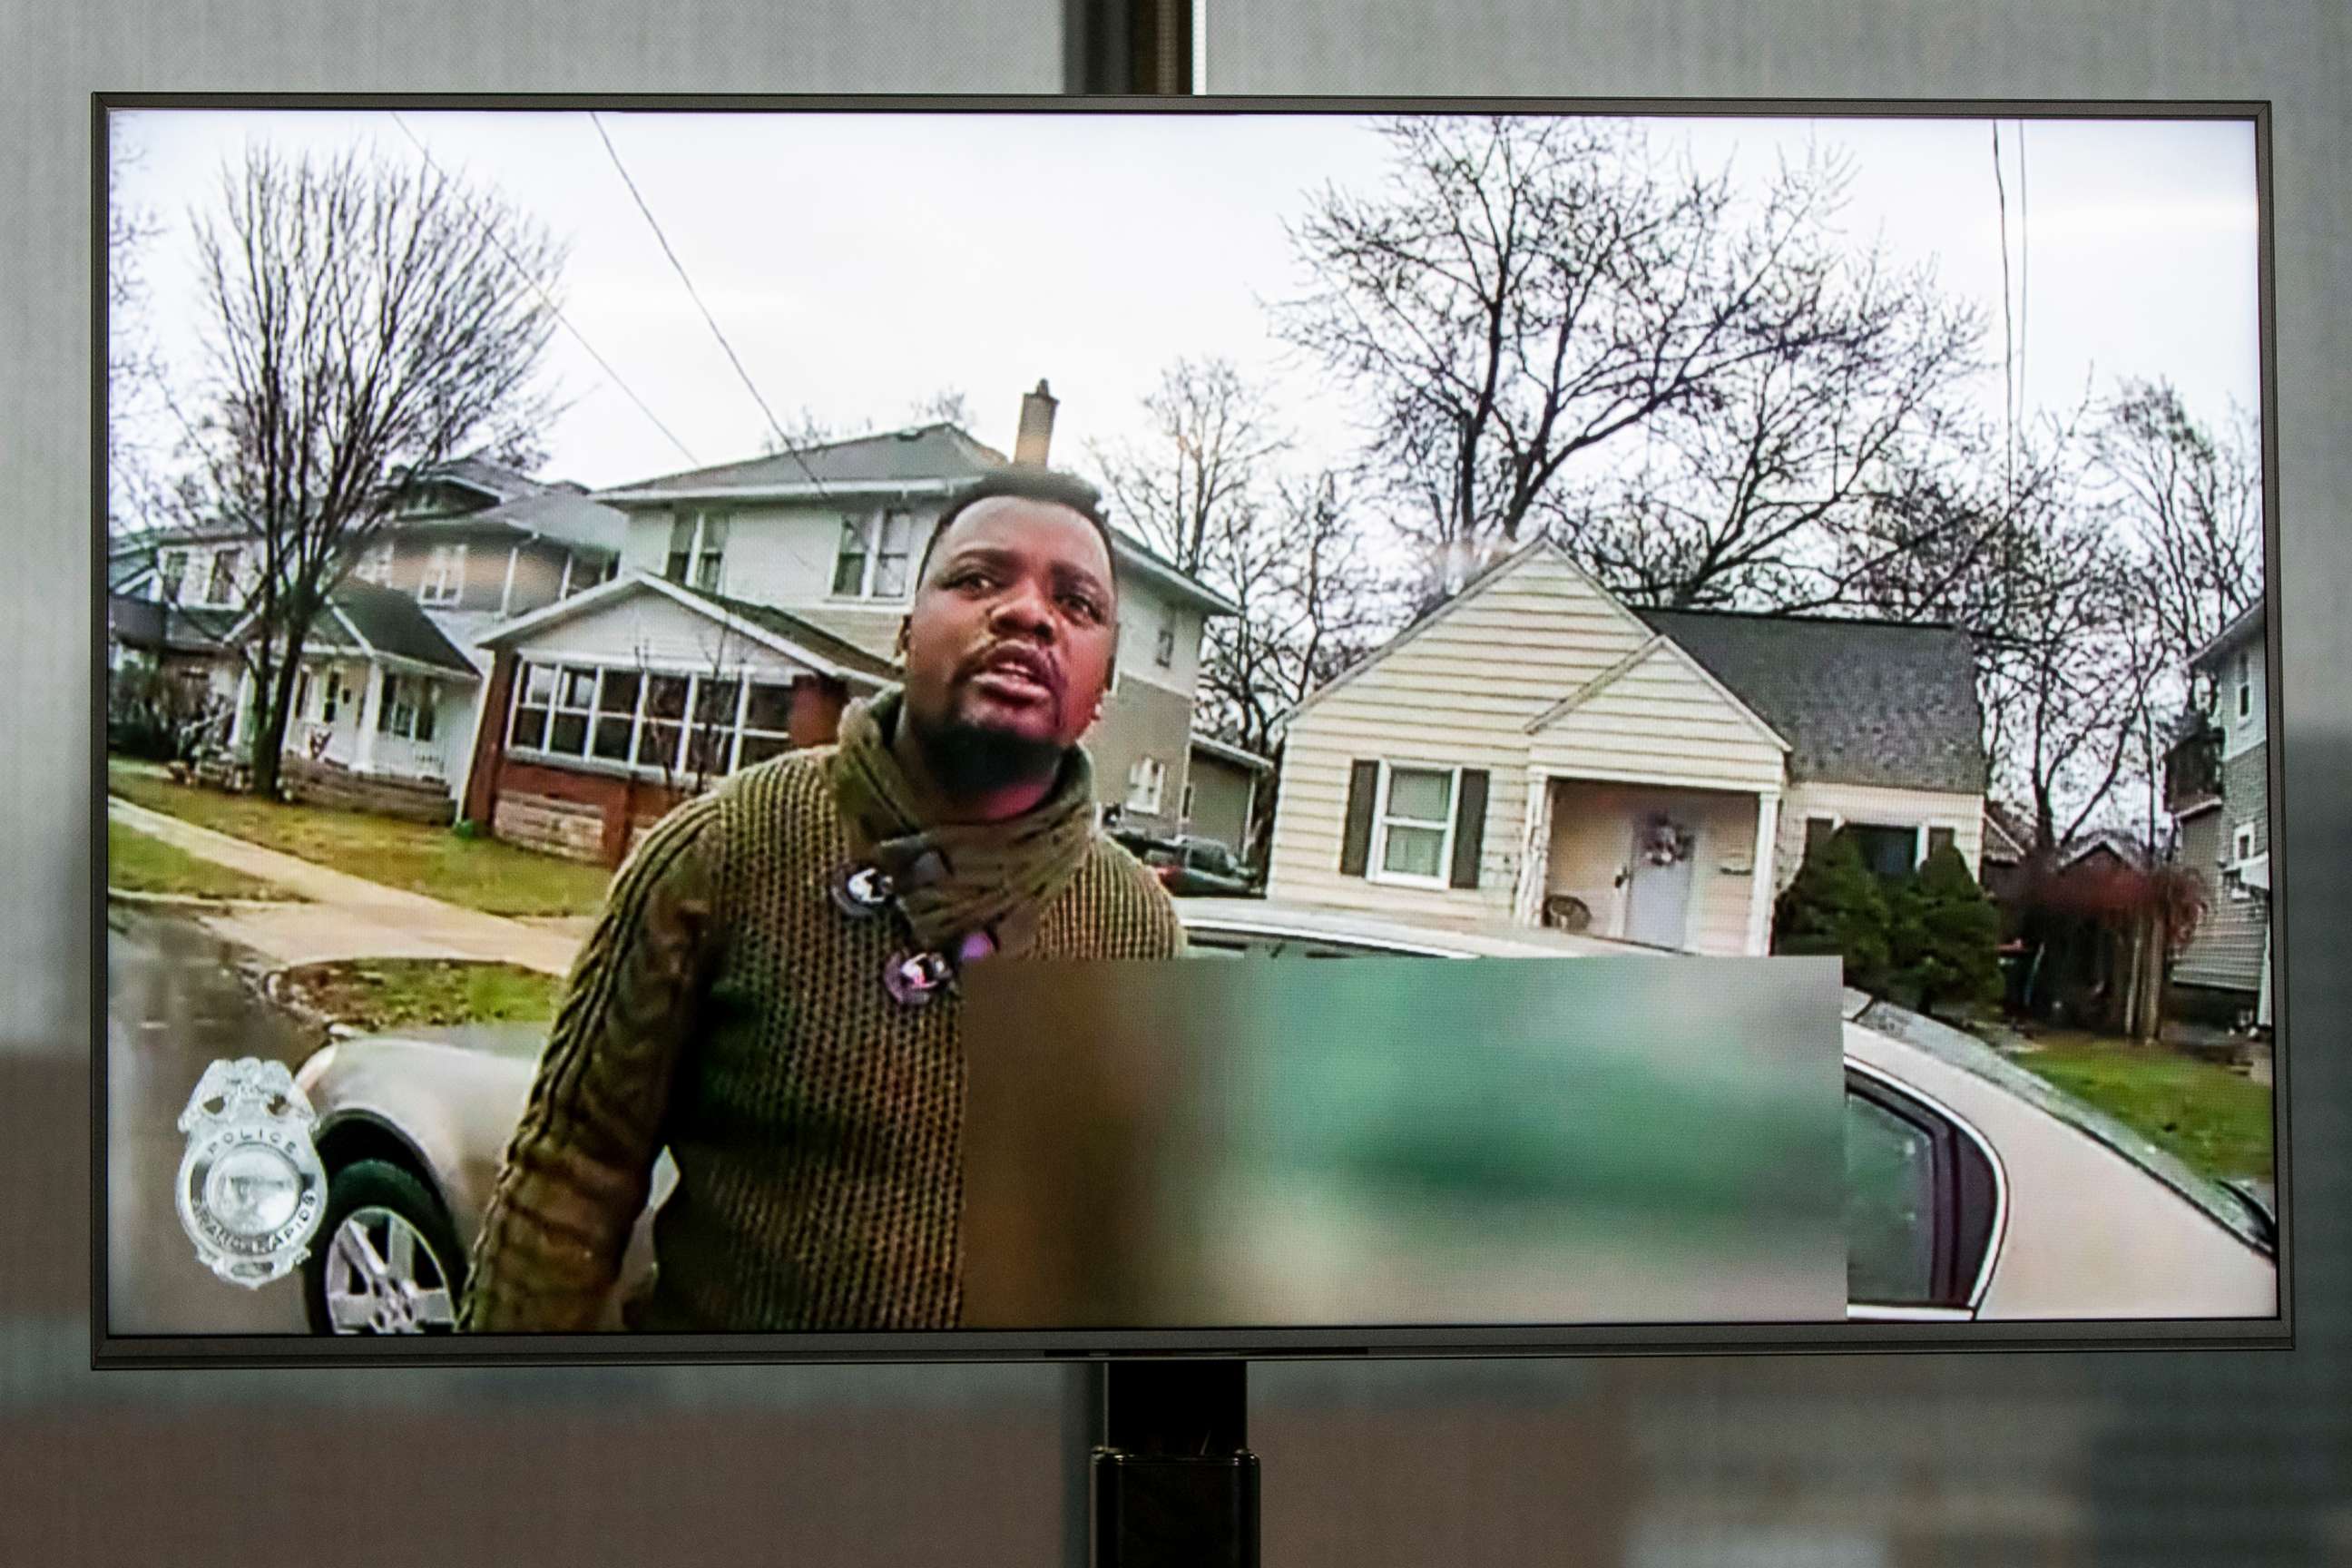 PHOTO: A monitor displays an image of Patrick Lyoya from police bodycam video during an encounter with a Grand Rapids police officer, during a press conference on April 13, 2022, at Grand Rapids City Hall.